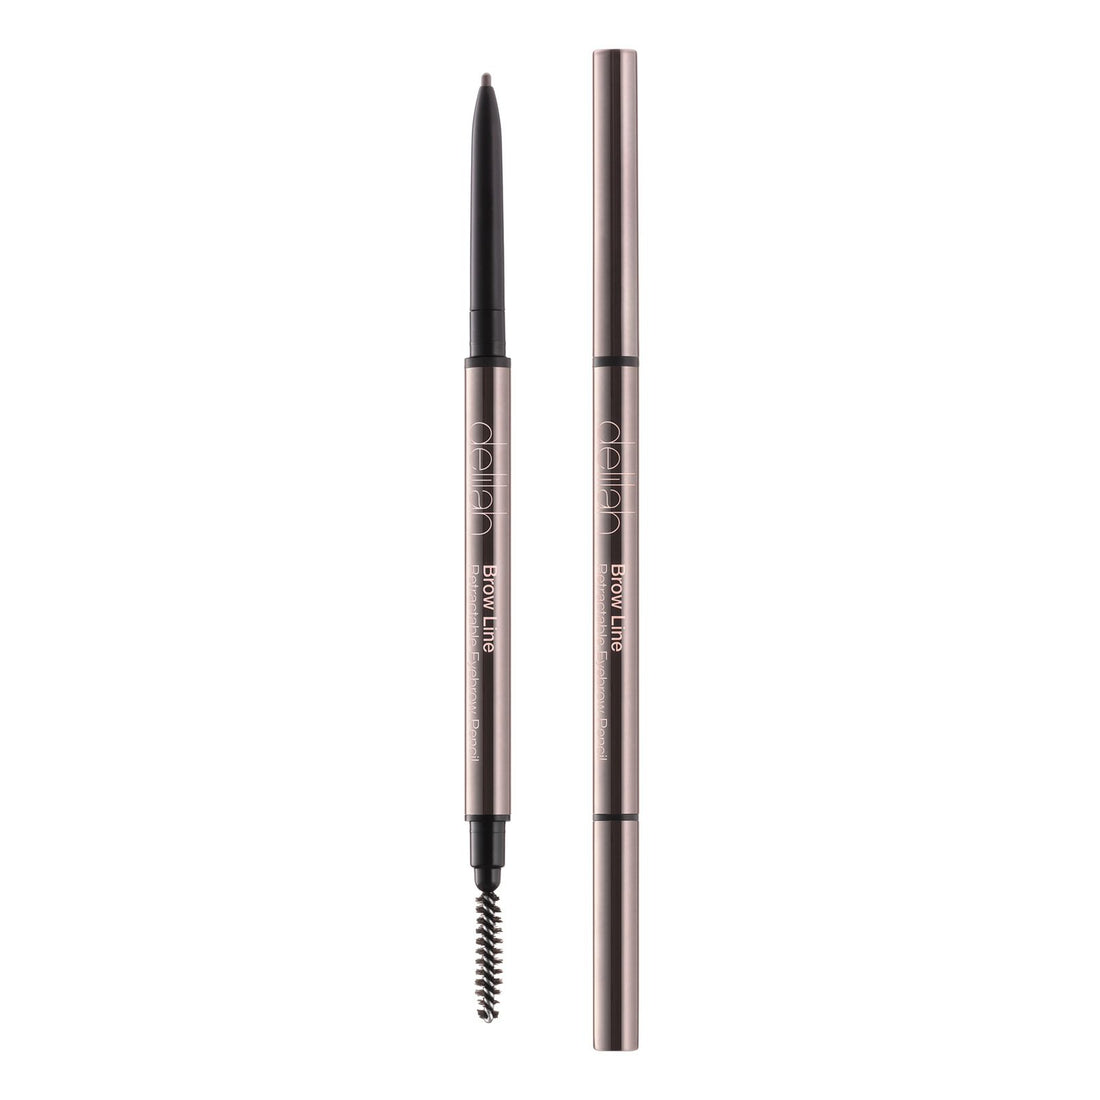 DELILAH twist-out eyebrow pencil with brush, 0.08 g